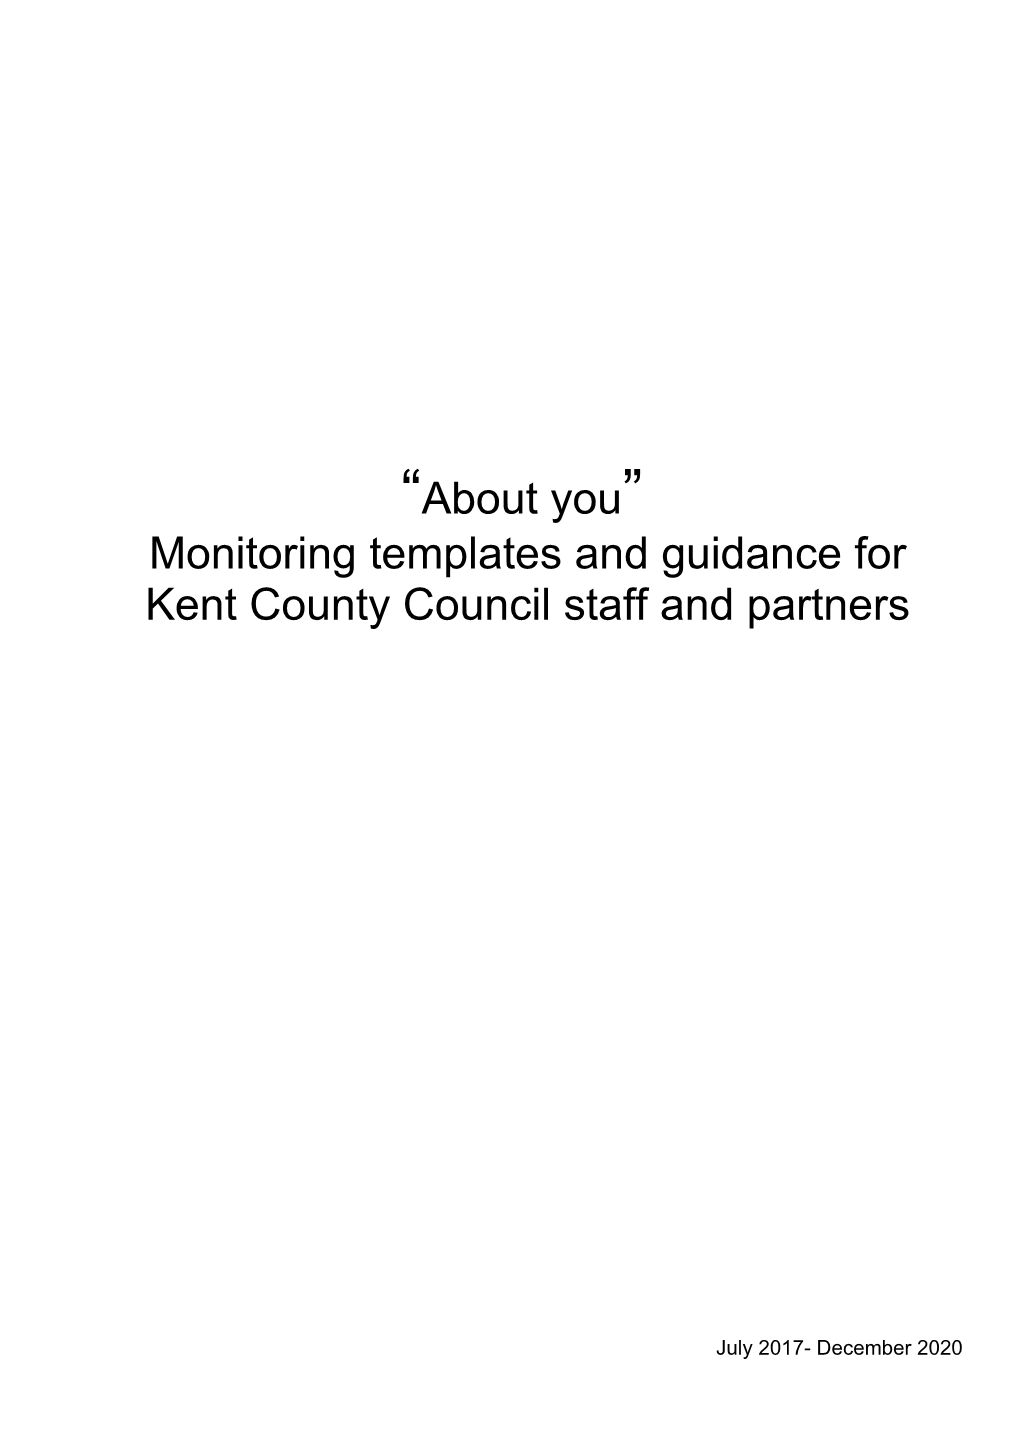 About You Monitoring Templates and Guidance Notes for Staff